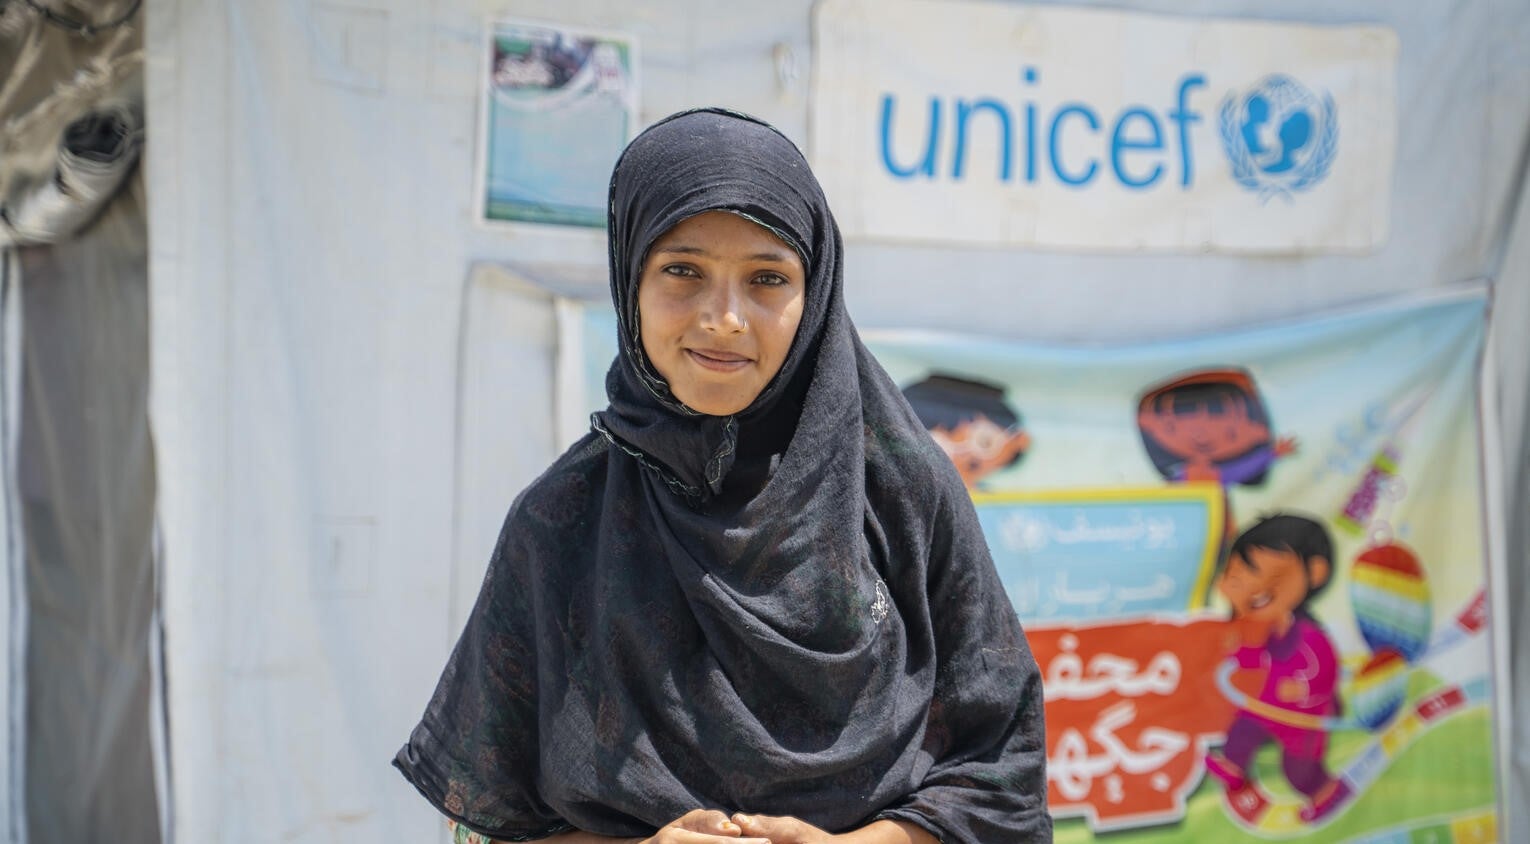 A young girl standing in front of a UNICEF tent in Pakistan.